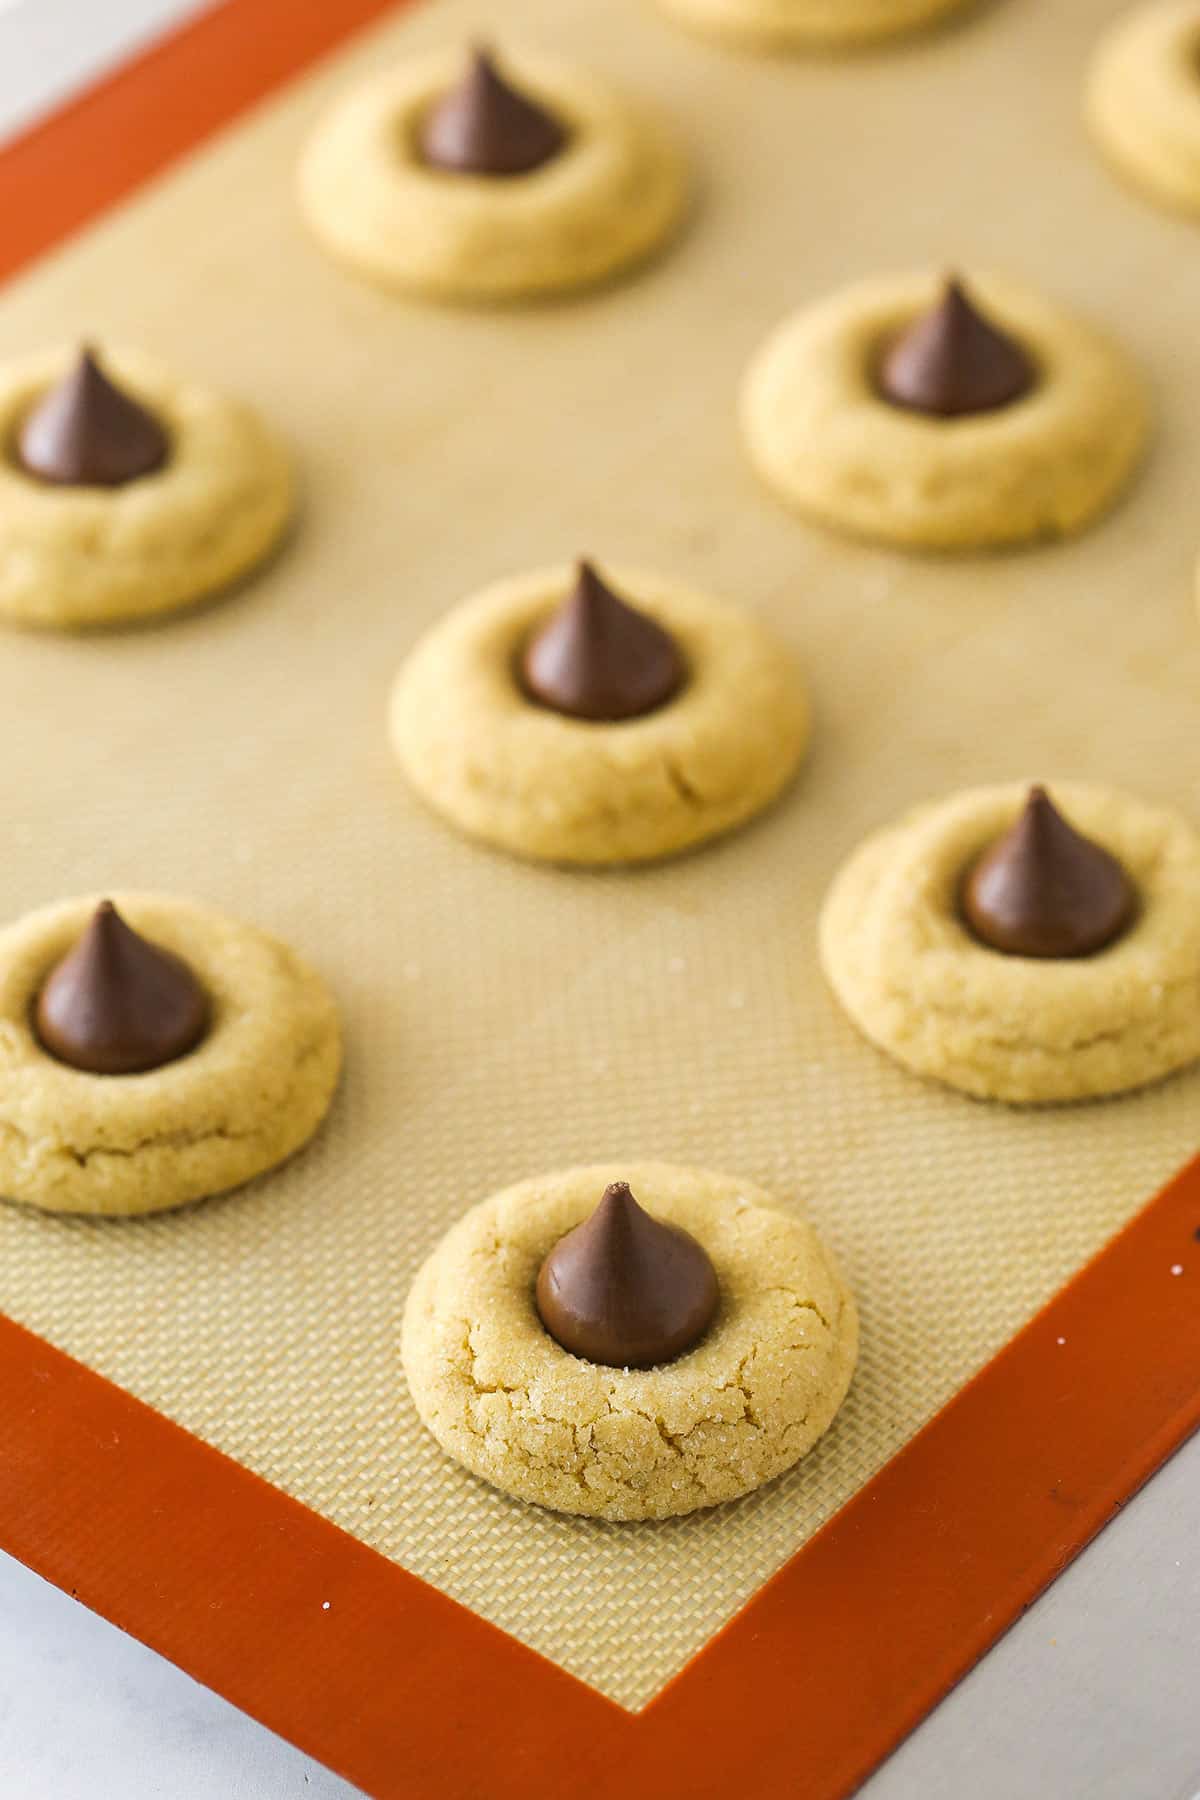 baked peanut butter blossoms with a hersheys kiss added